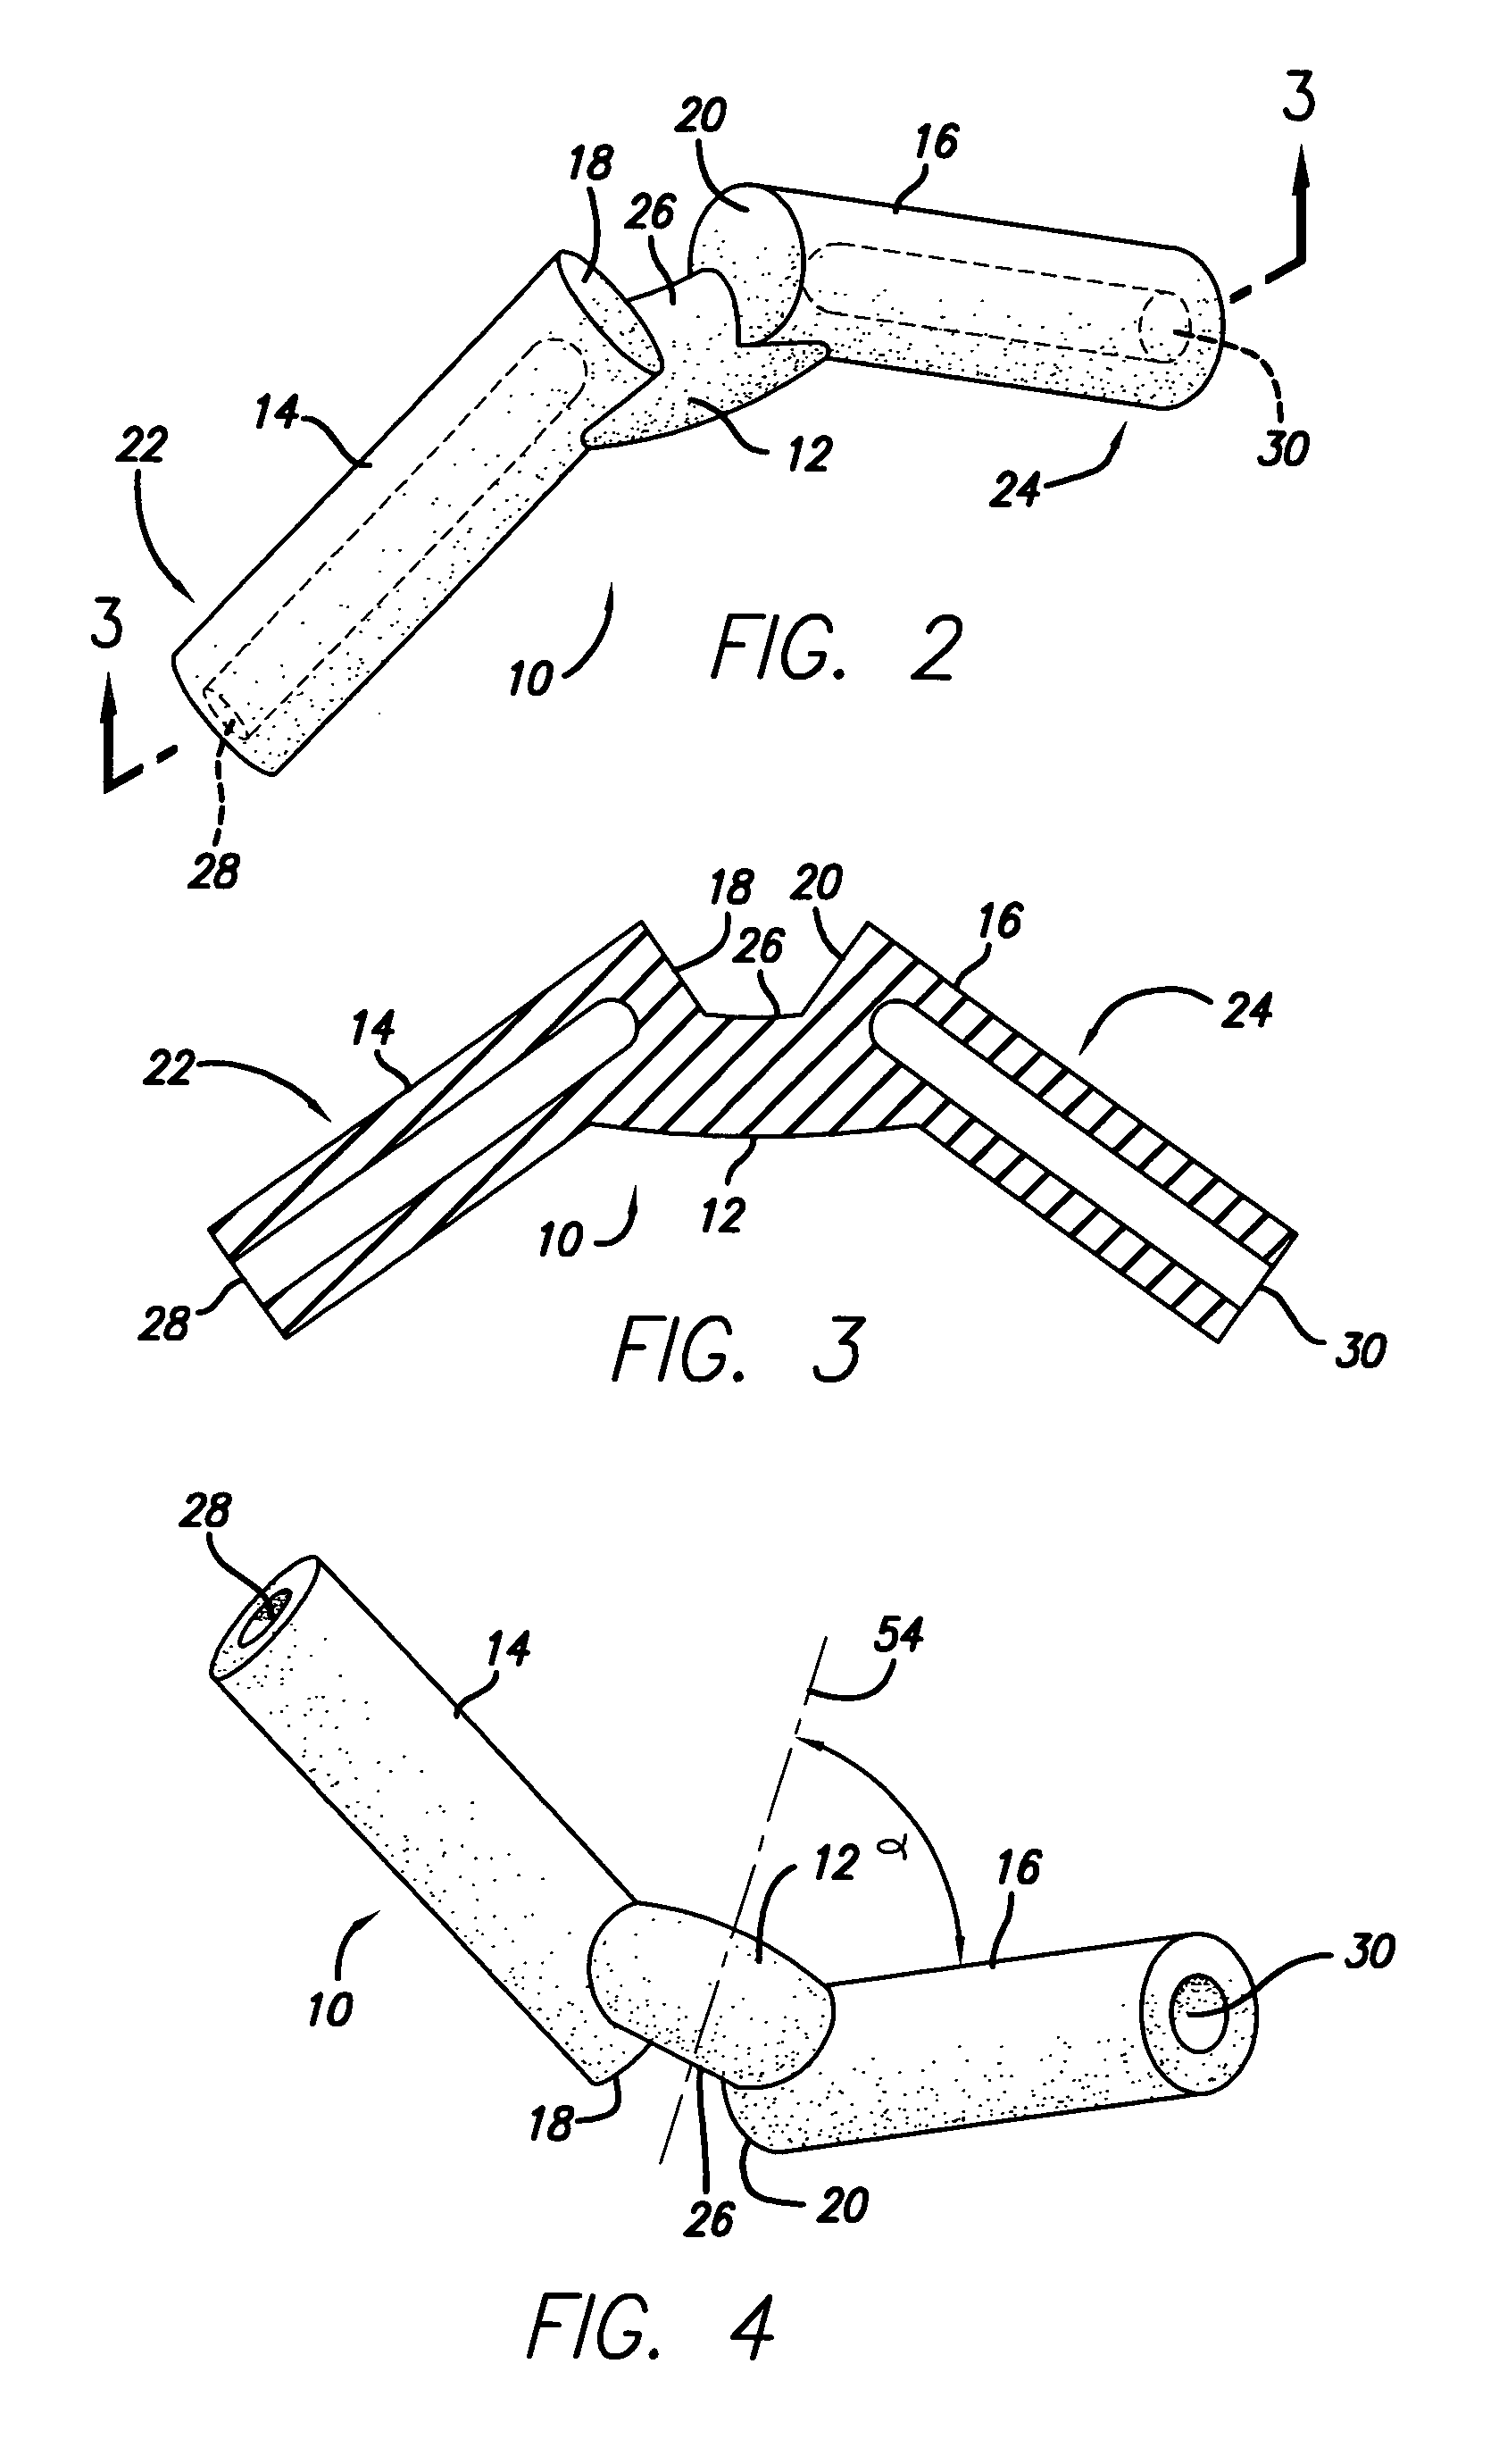 Kite and assembly connector